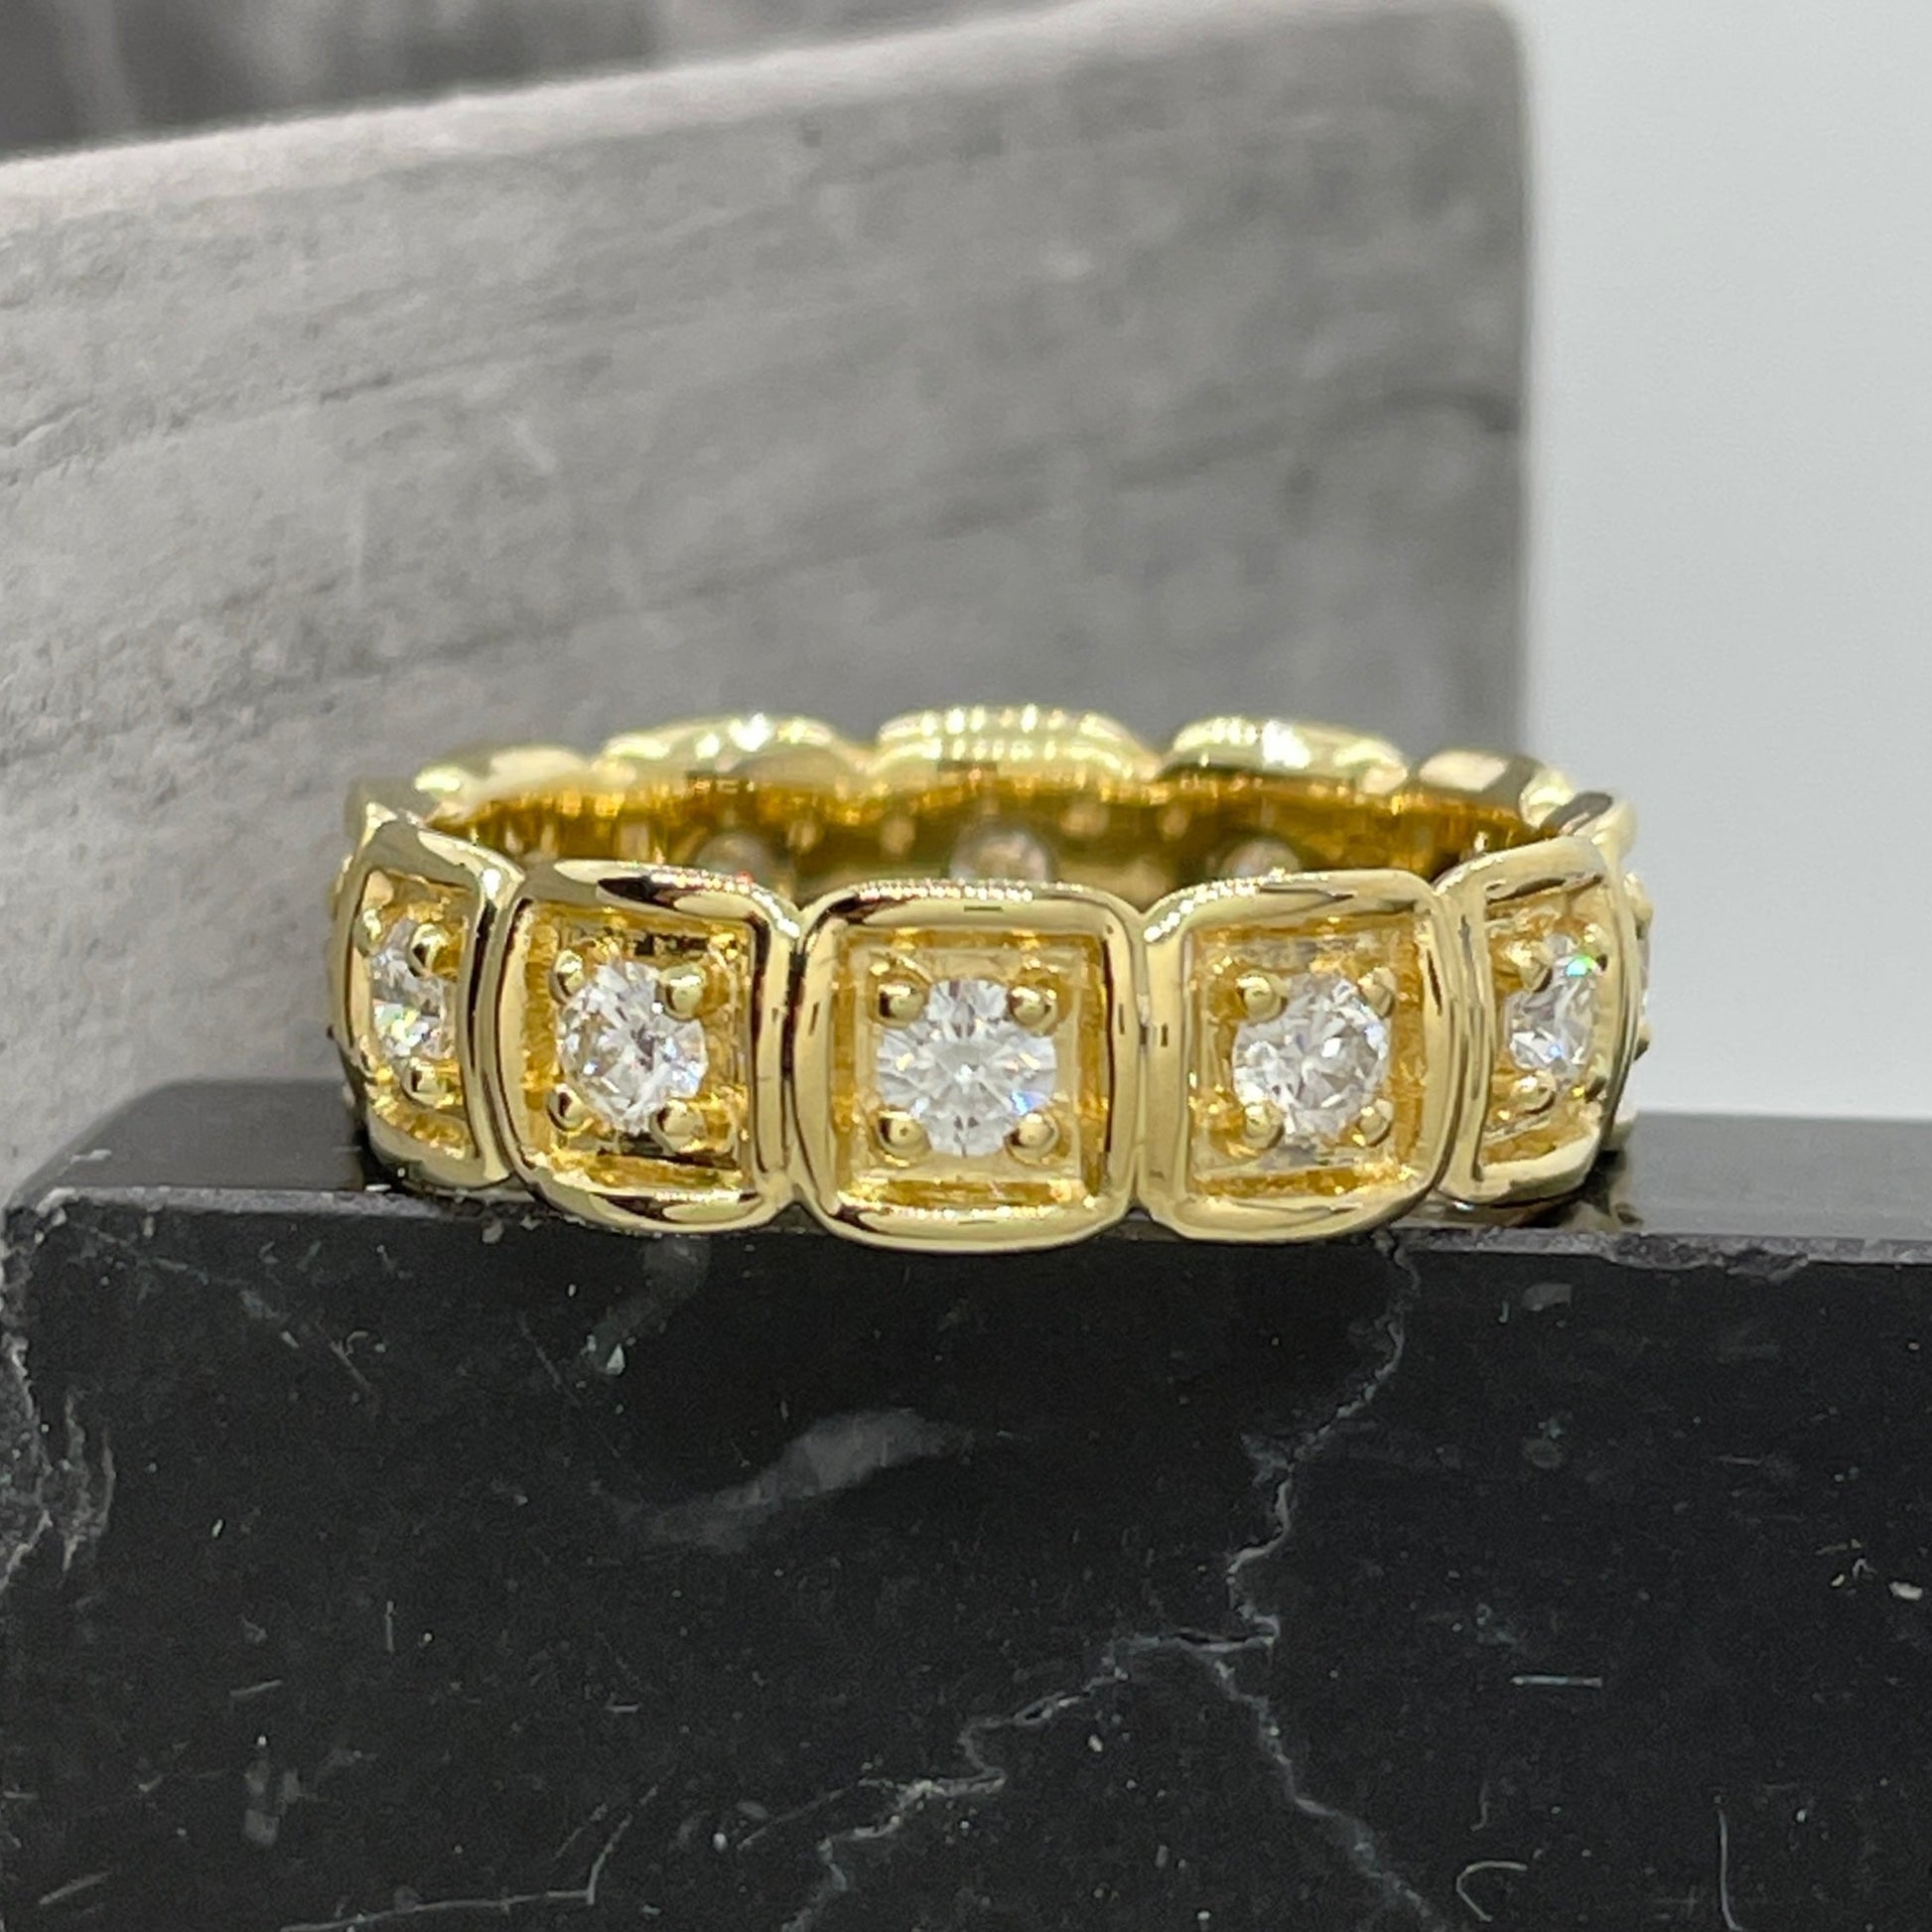 OctaHedron Jewelry Fillmore Natural Diamond 5.75mm Eternity Band Yellow Gold 